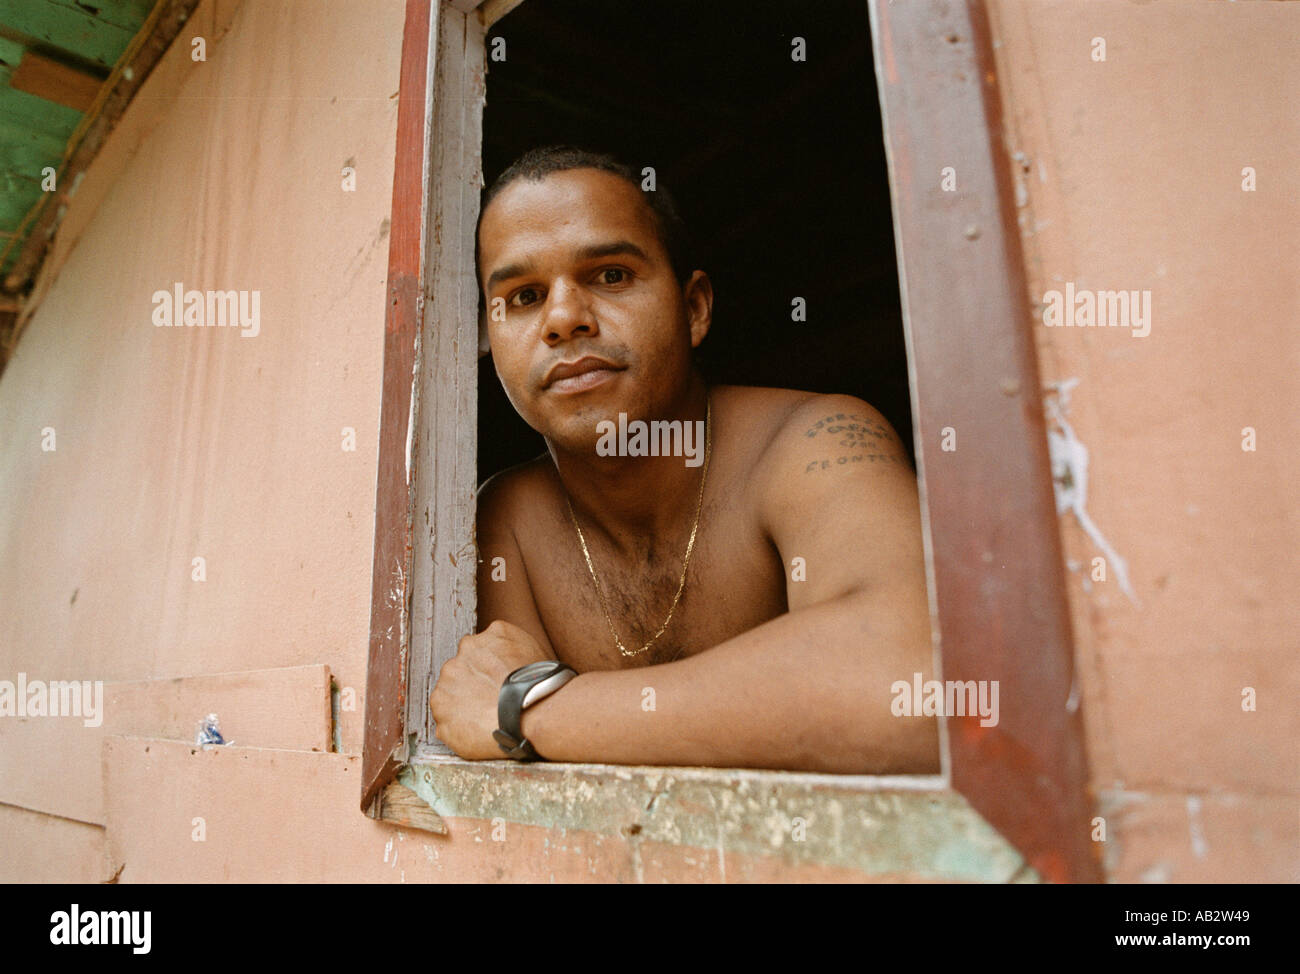 Resident of the hillside squatter settlement of Ezequiel Zamora in Caracas Venezuela poses in the window of his plywood house Stock Photo